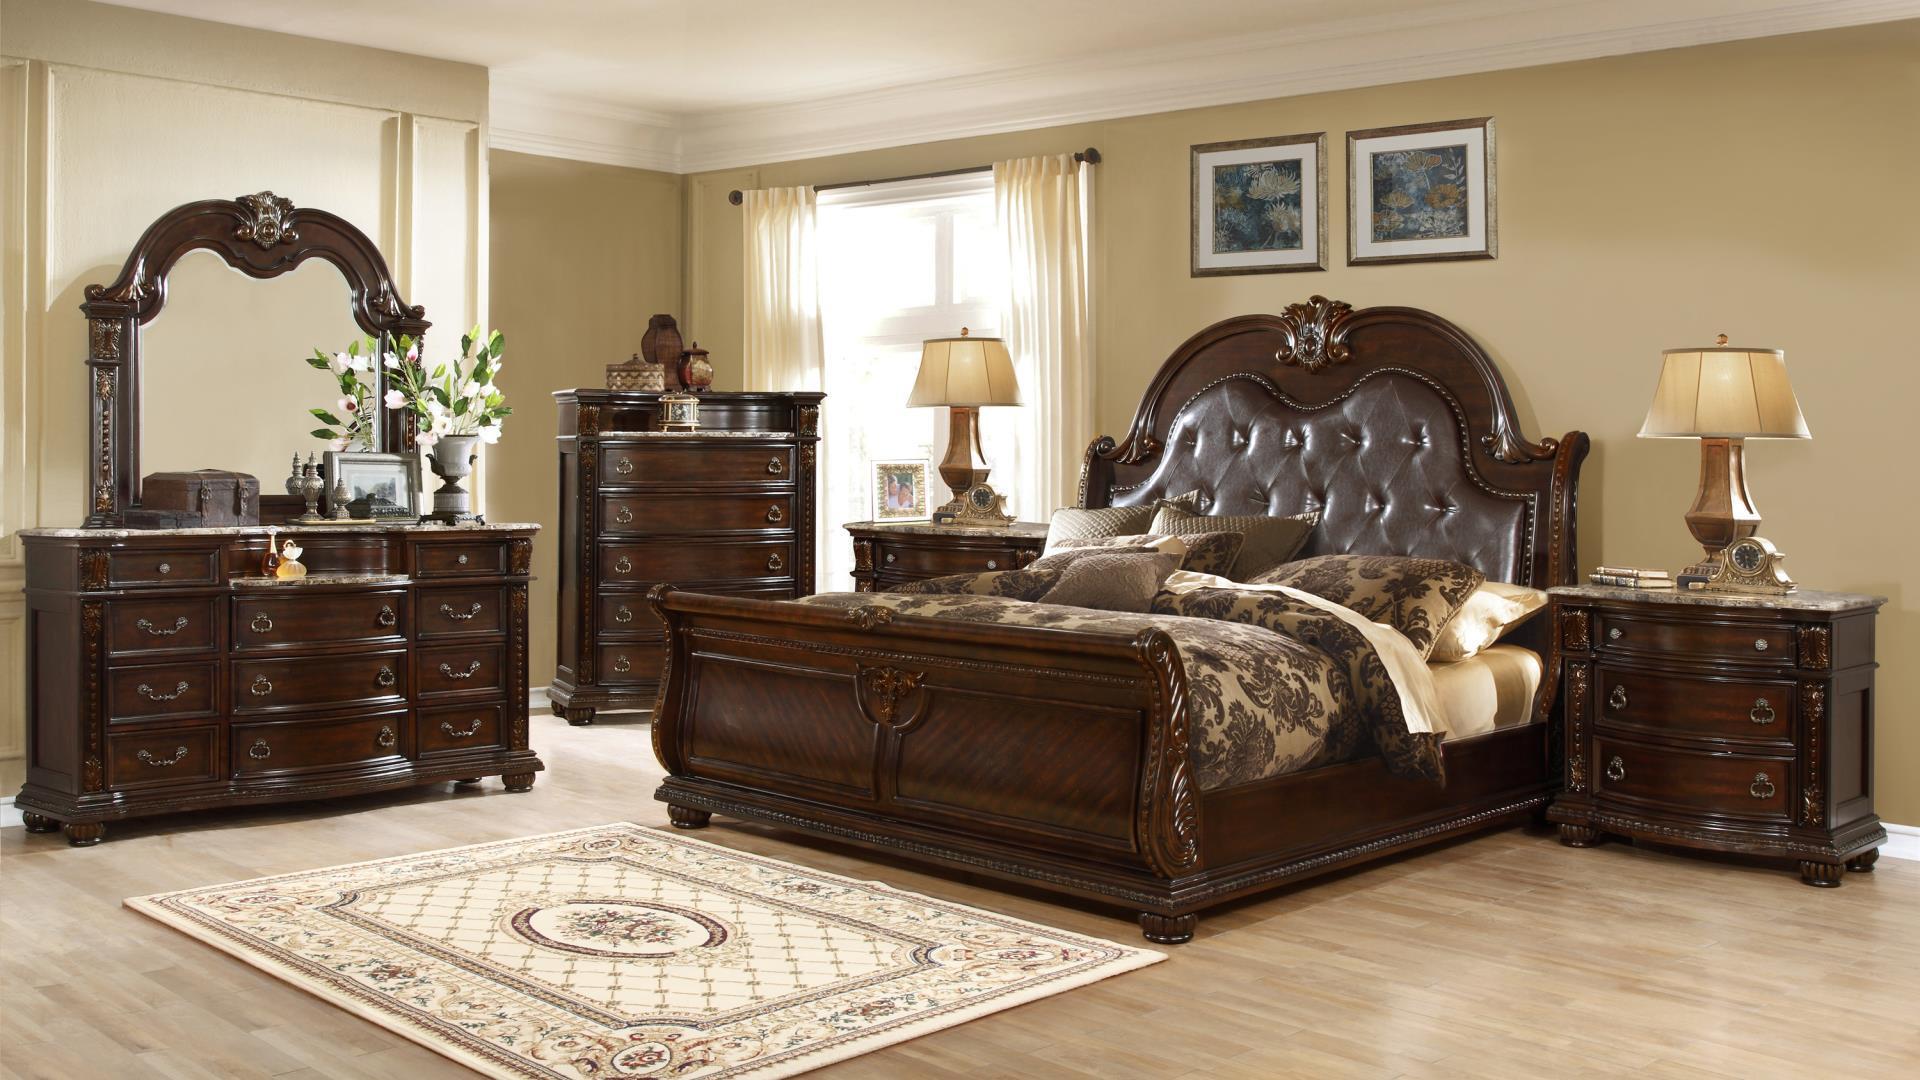 

    
Walnut Carved Wood Sleigh King Bed Set 4P ROMA Galaxy Home Traditional Classic
